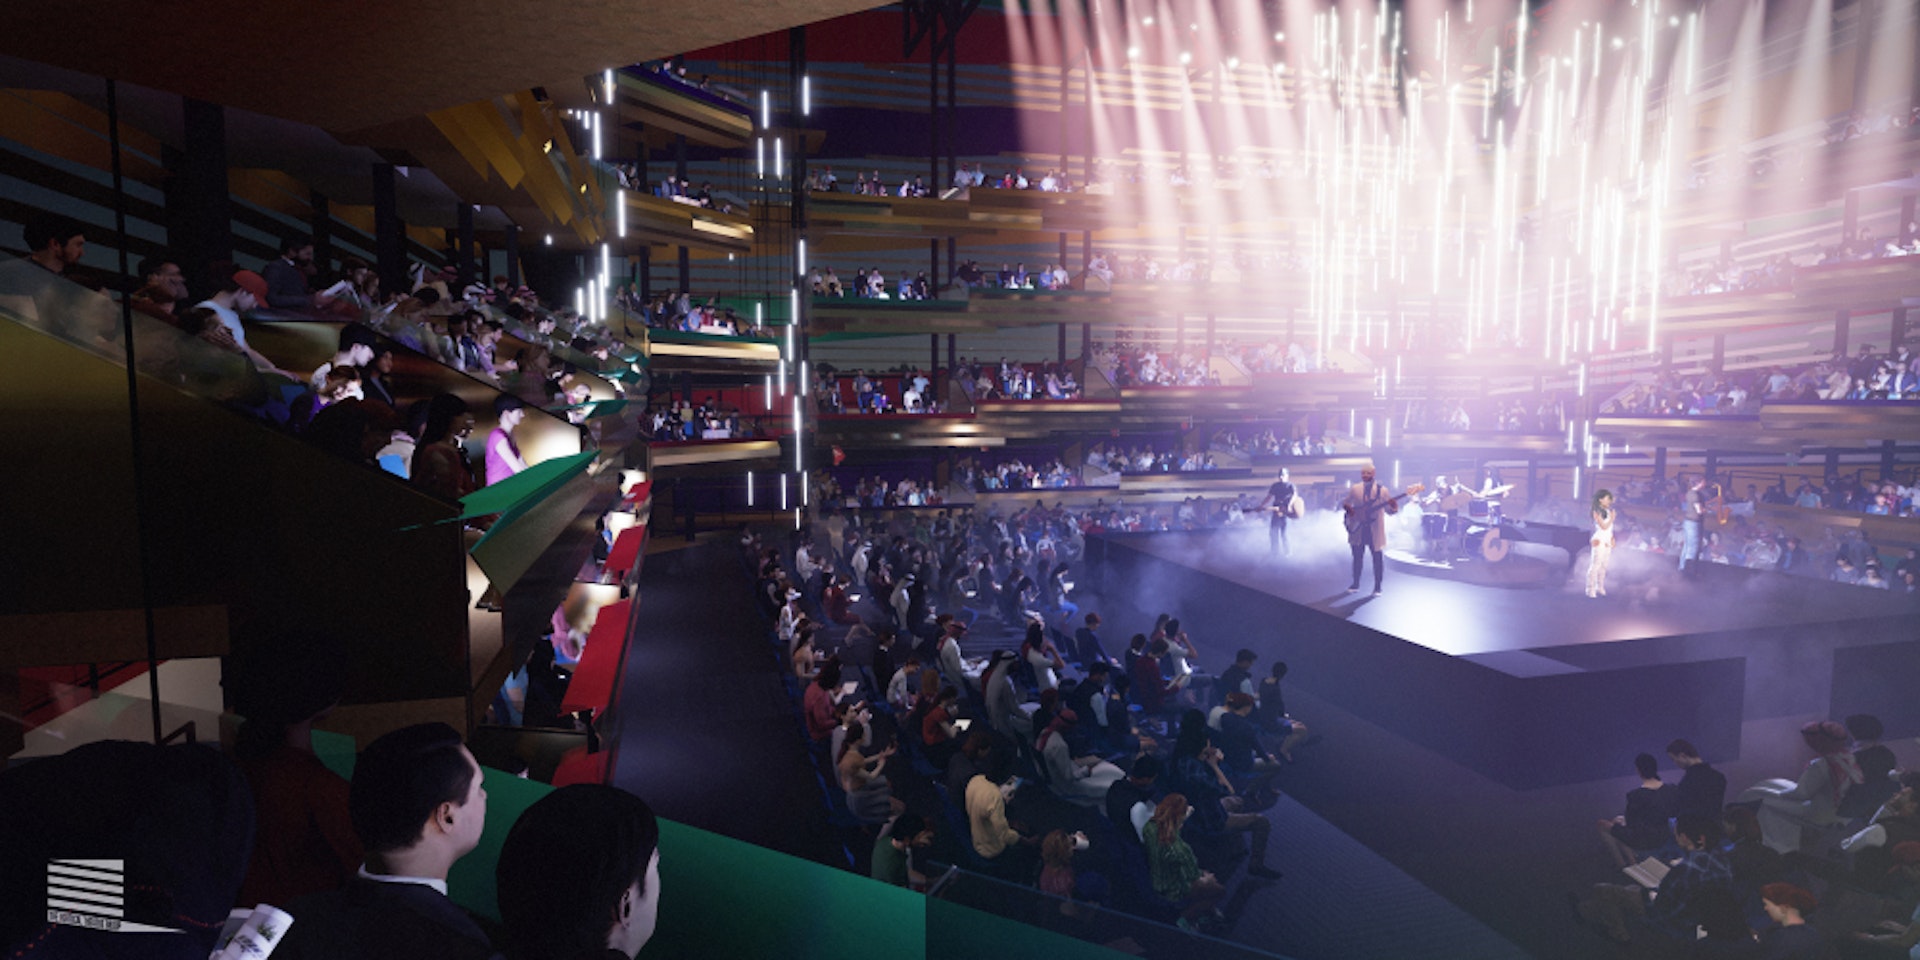 A rendering of the interior of the Vertical Theatre